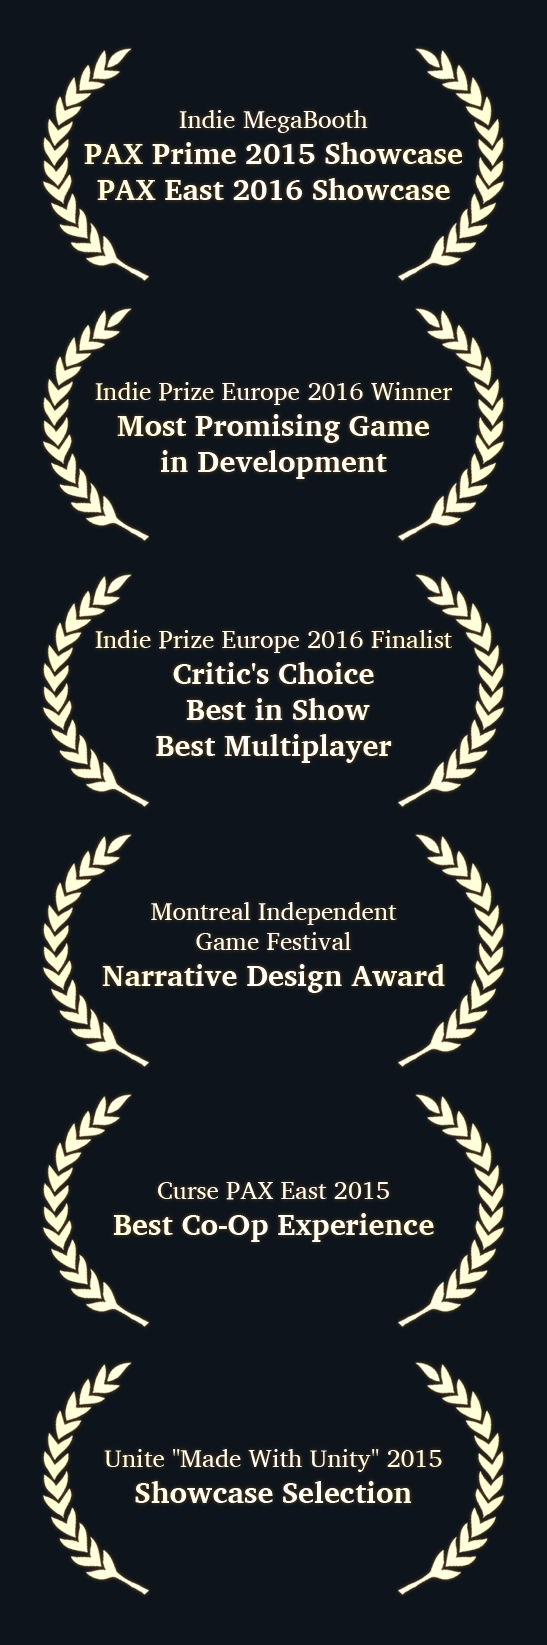 【Indie MegaBooth】 《PAX Prime 2015 Showcase》 《PAX East 2016 Showcase》 ▓ 【Indie Prize Europe 2016 Winner】 《Most Promising Game in Development》 ▓ 【Indie Prize Europe 2016 Finalist】 《Critic's Choice》 《Best in Show》 《Best Multiplayer》 ▓ 【Montreal Independent Game Festival】 《Narrative Design Award》 ▓ 【Curse PAX East 2015】 《Best Co-Op Experience》 ▓ 【Unite ''Made With Unity'' 2015】 《Showcase Selection》